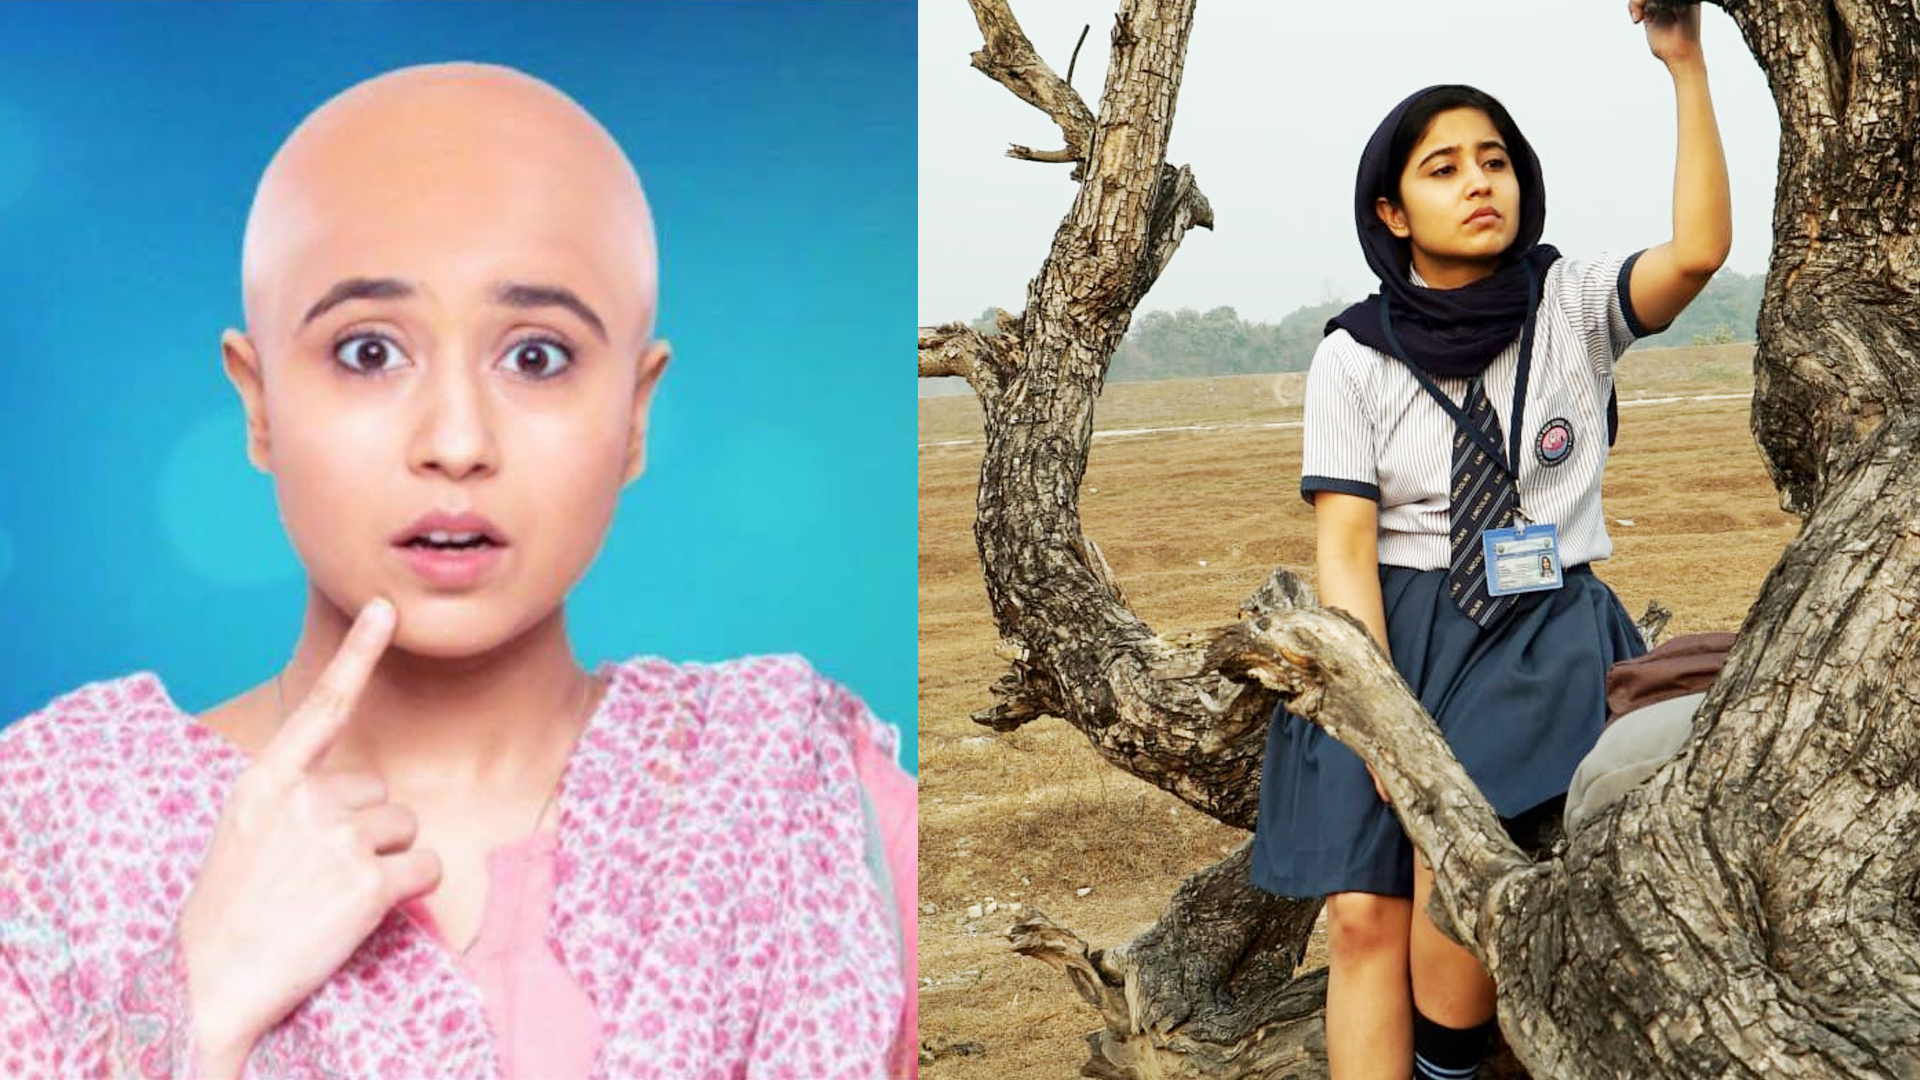 With her new look in Gone Kesh, Shweta Tripathi sends message to our society.